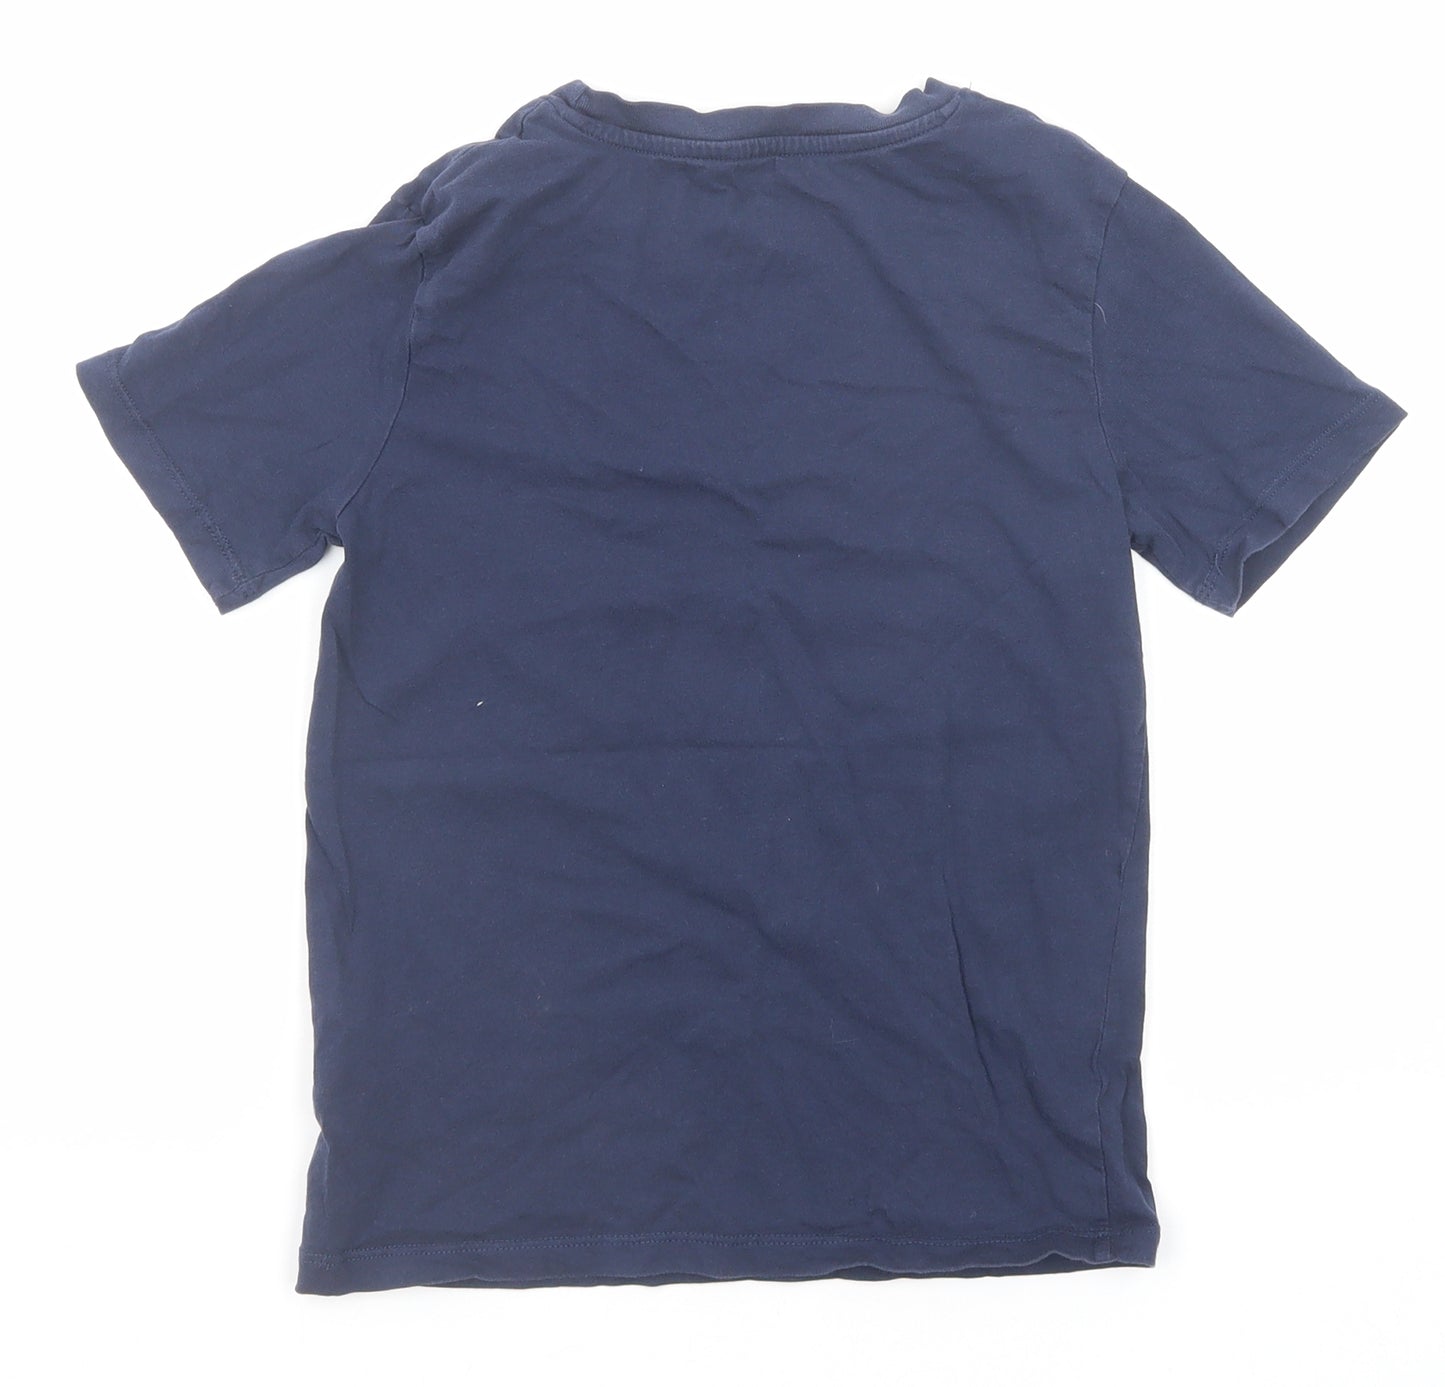 H&M Boys Blue Cotton Basic T-Shirt Size 7-8 Years Round Neck Pullover